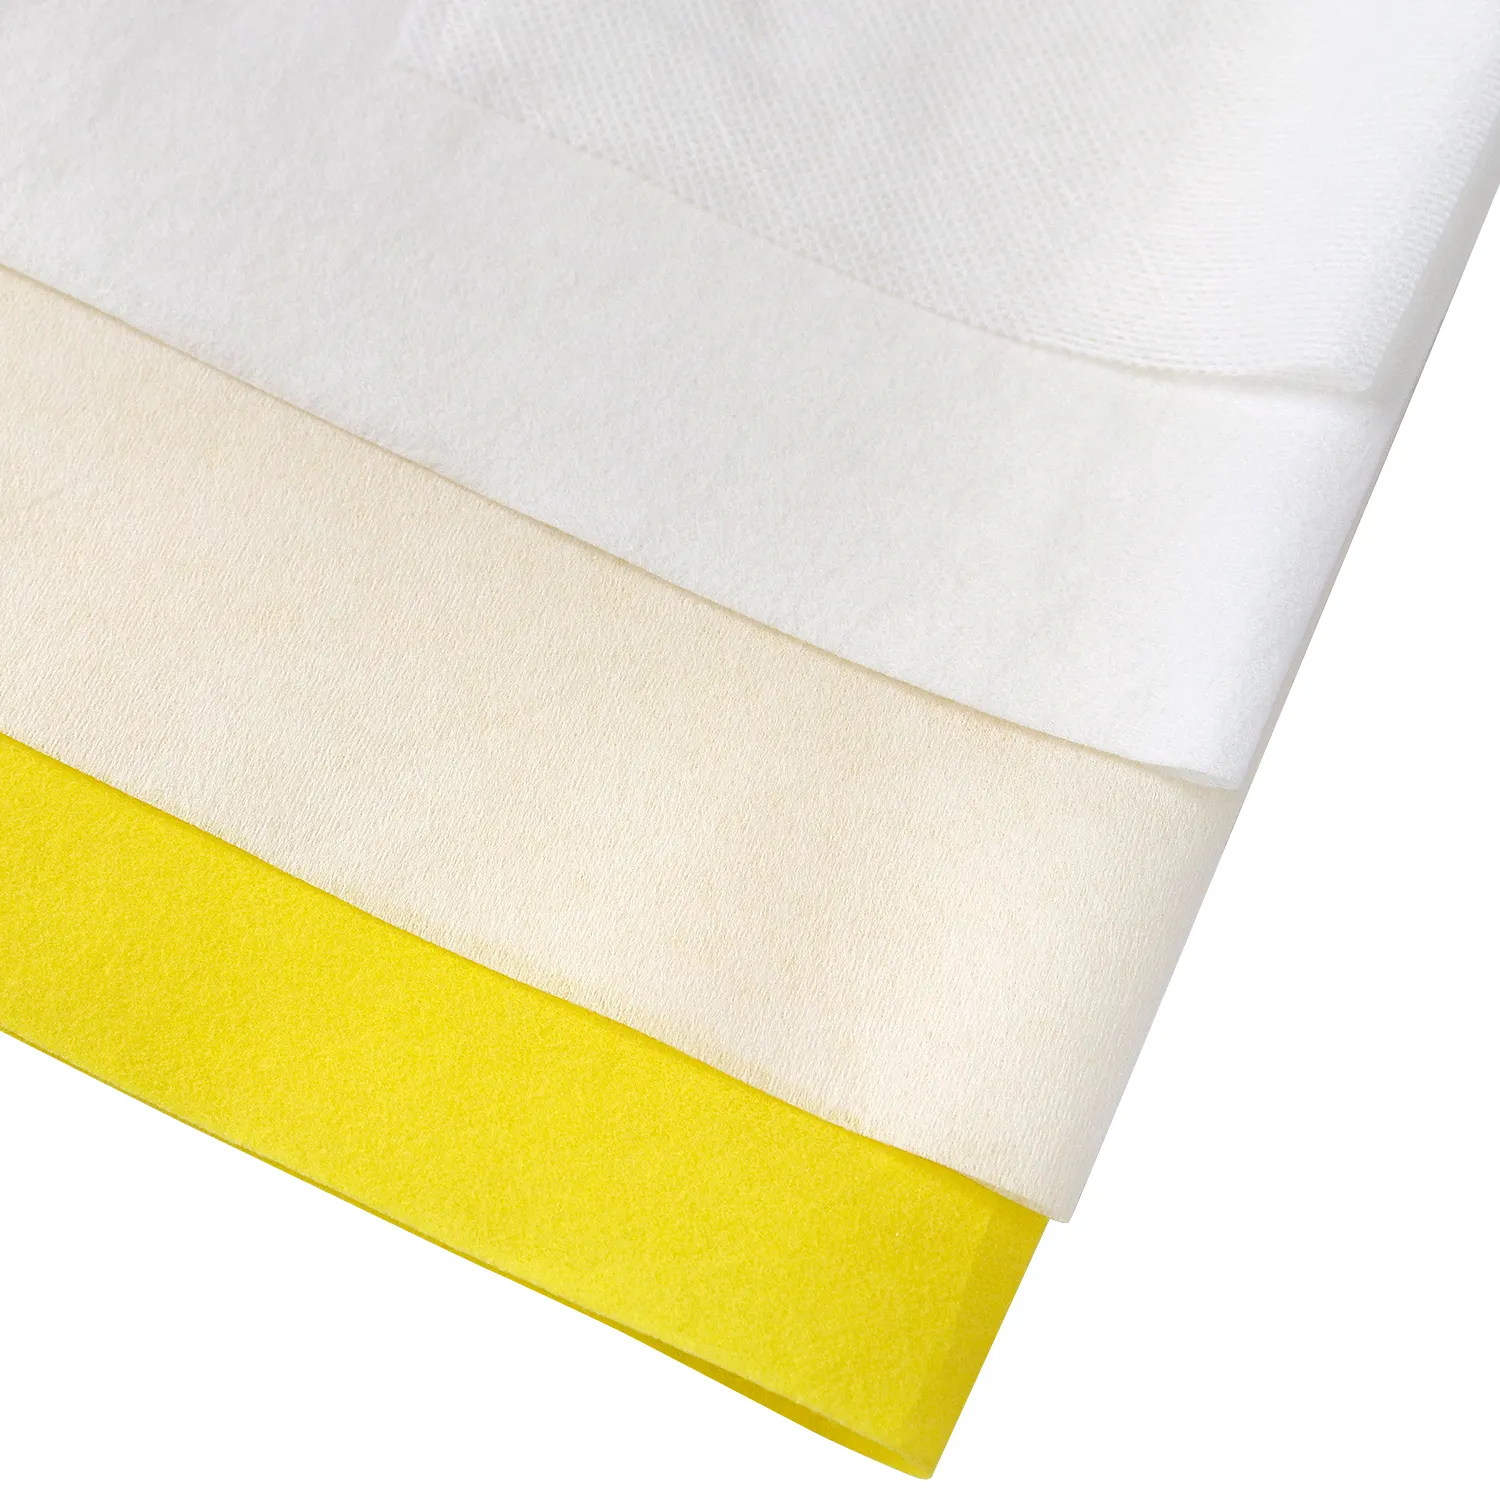 Surgical Dressing Pad Viscose And Polyester Spunlace Nonwoven Fabric